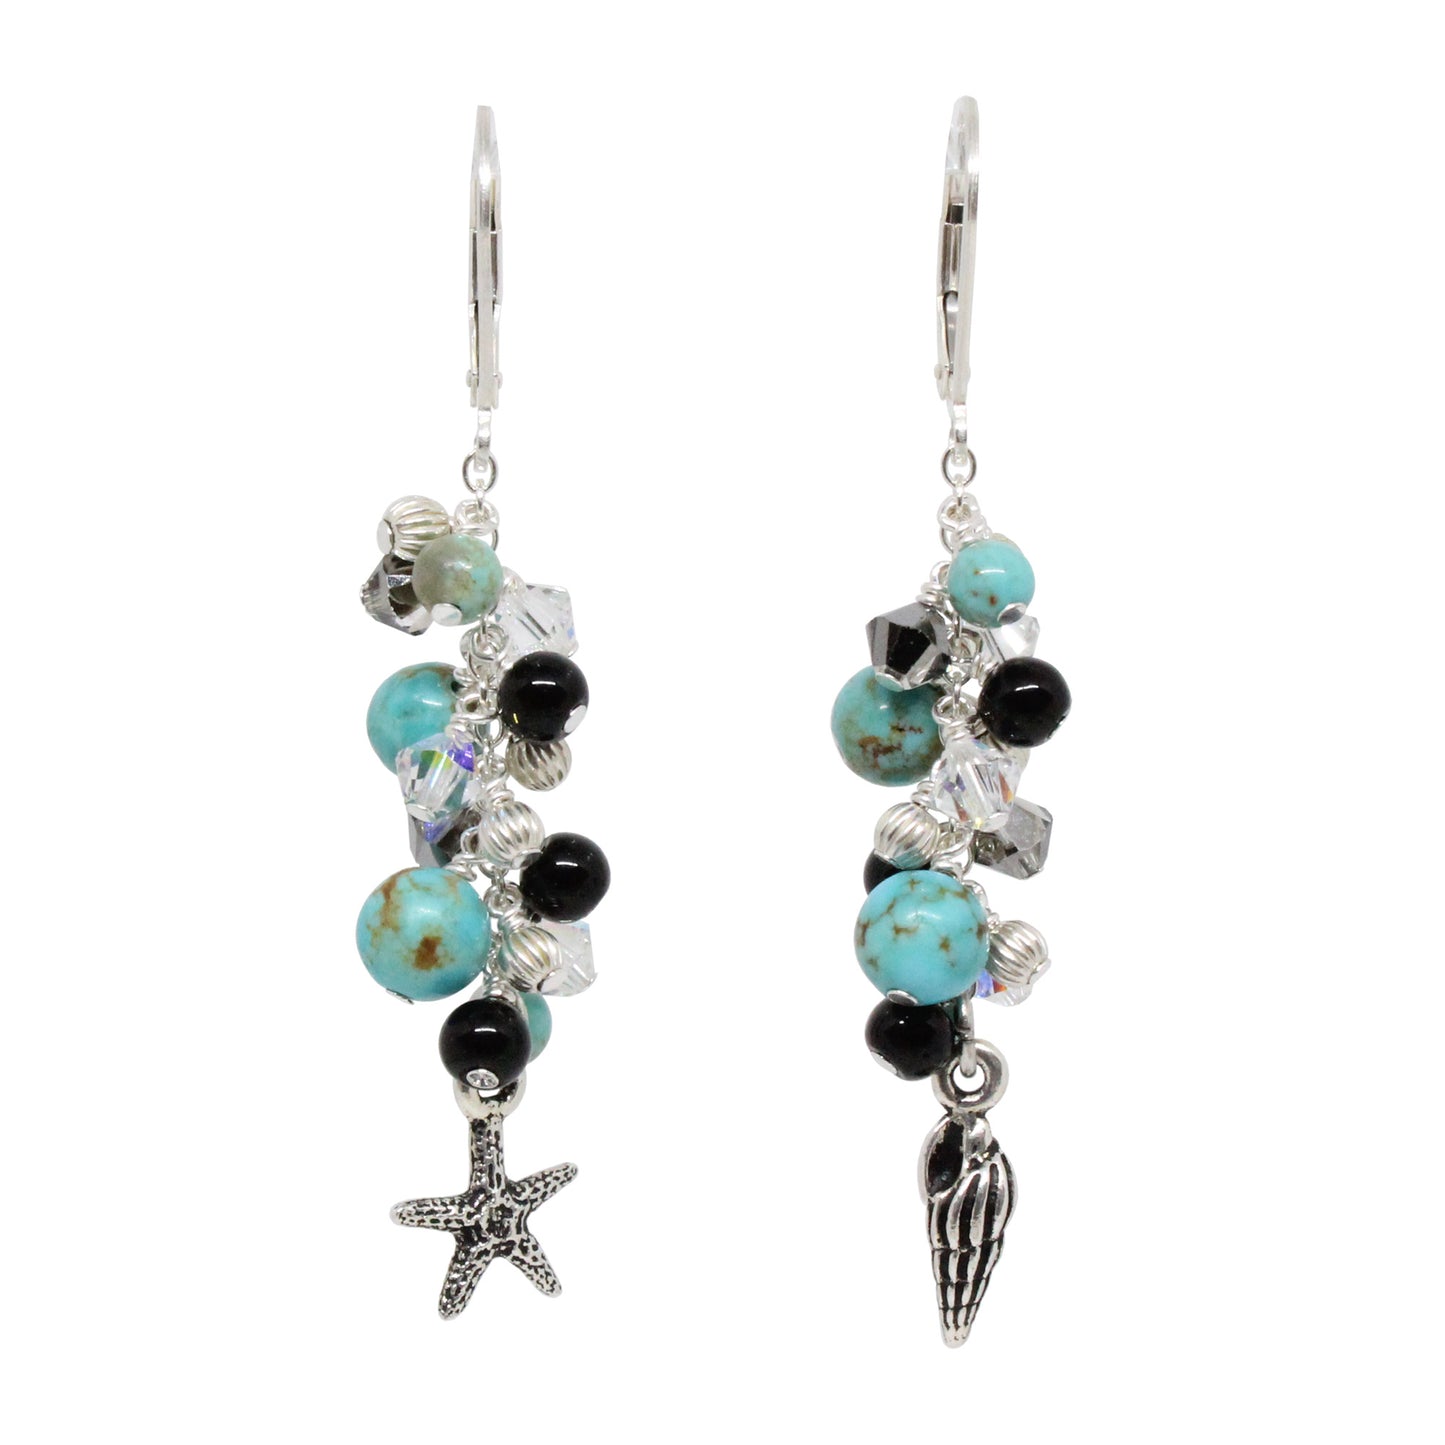 Turquoise Island Cascade Earrings / 60mm length / beach charms / sterling silver leverback earwires